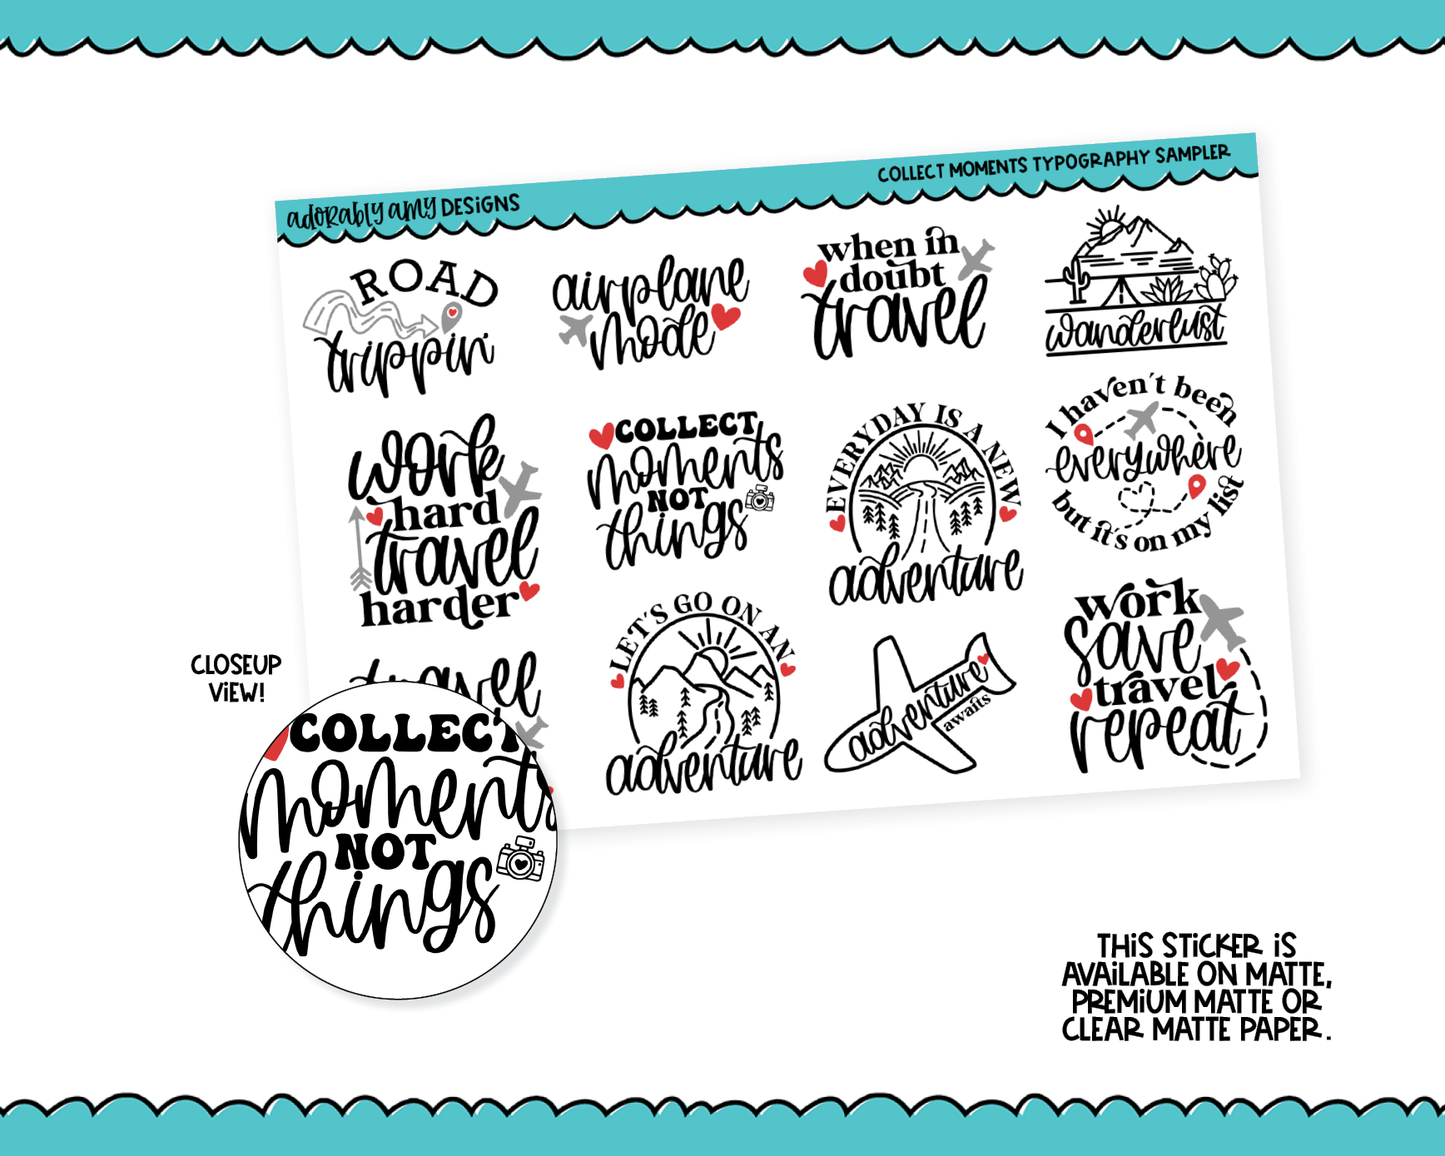 Collect Moments Travel Themed Doodled Typography Sampler Planner Stickers for any Planner or Insert